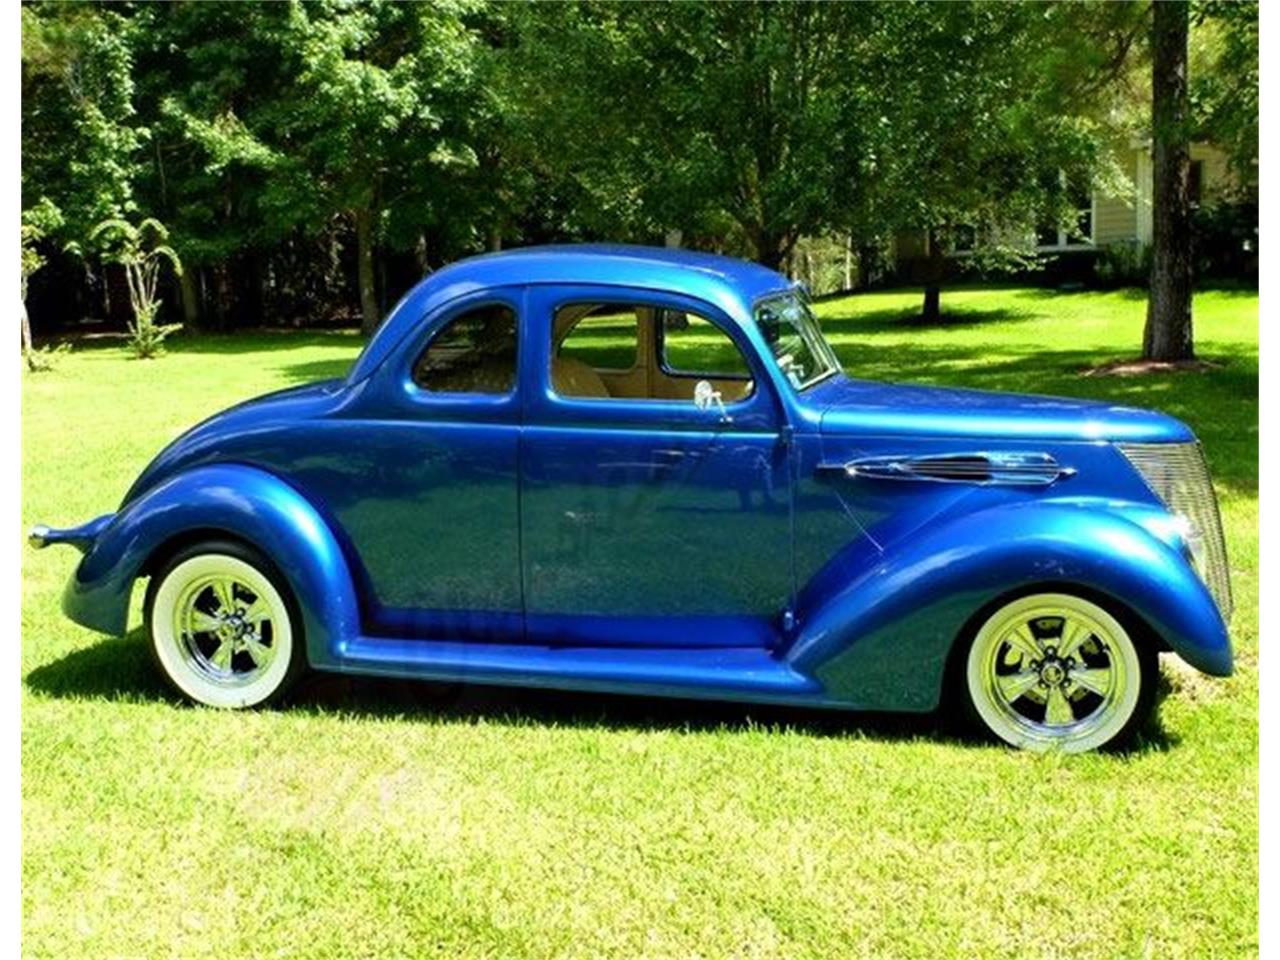 1937 Ford Coupe for Sale | ClassicCars.com | CC-1015775